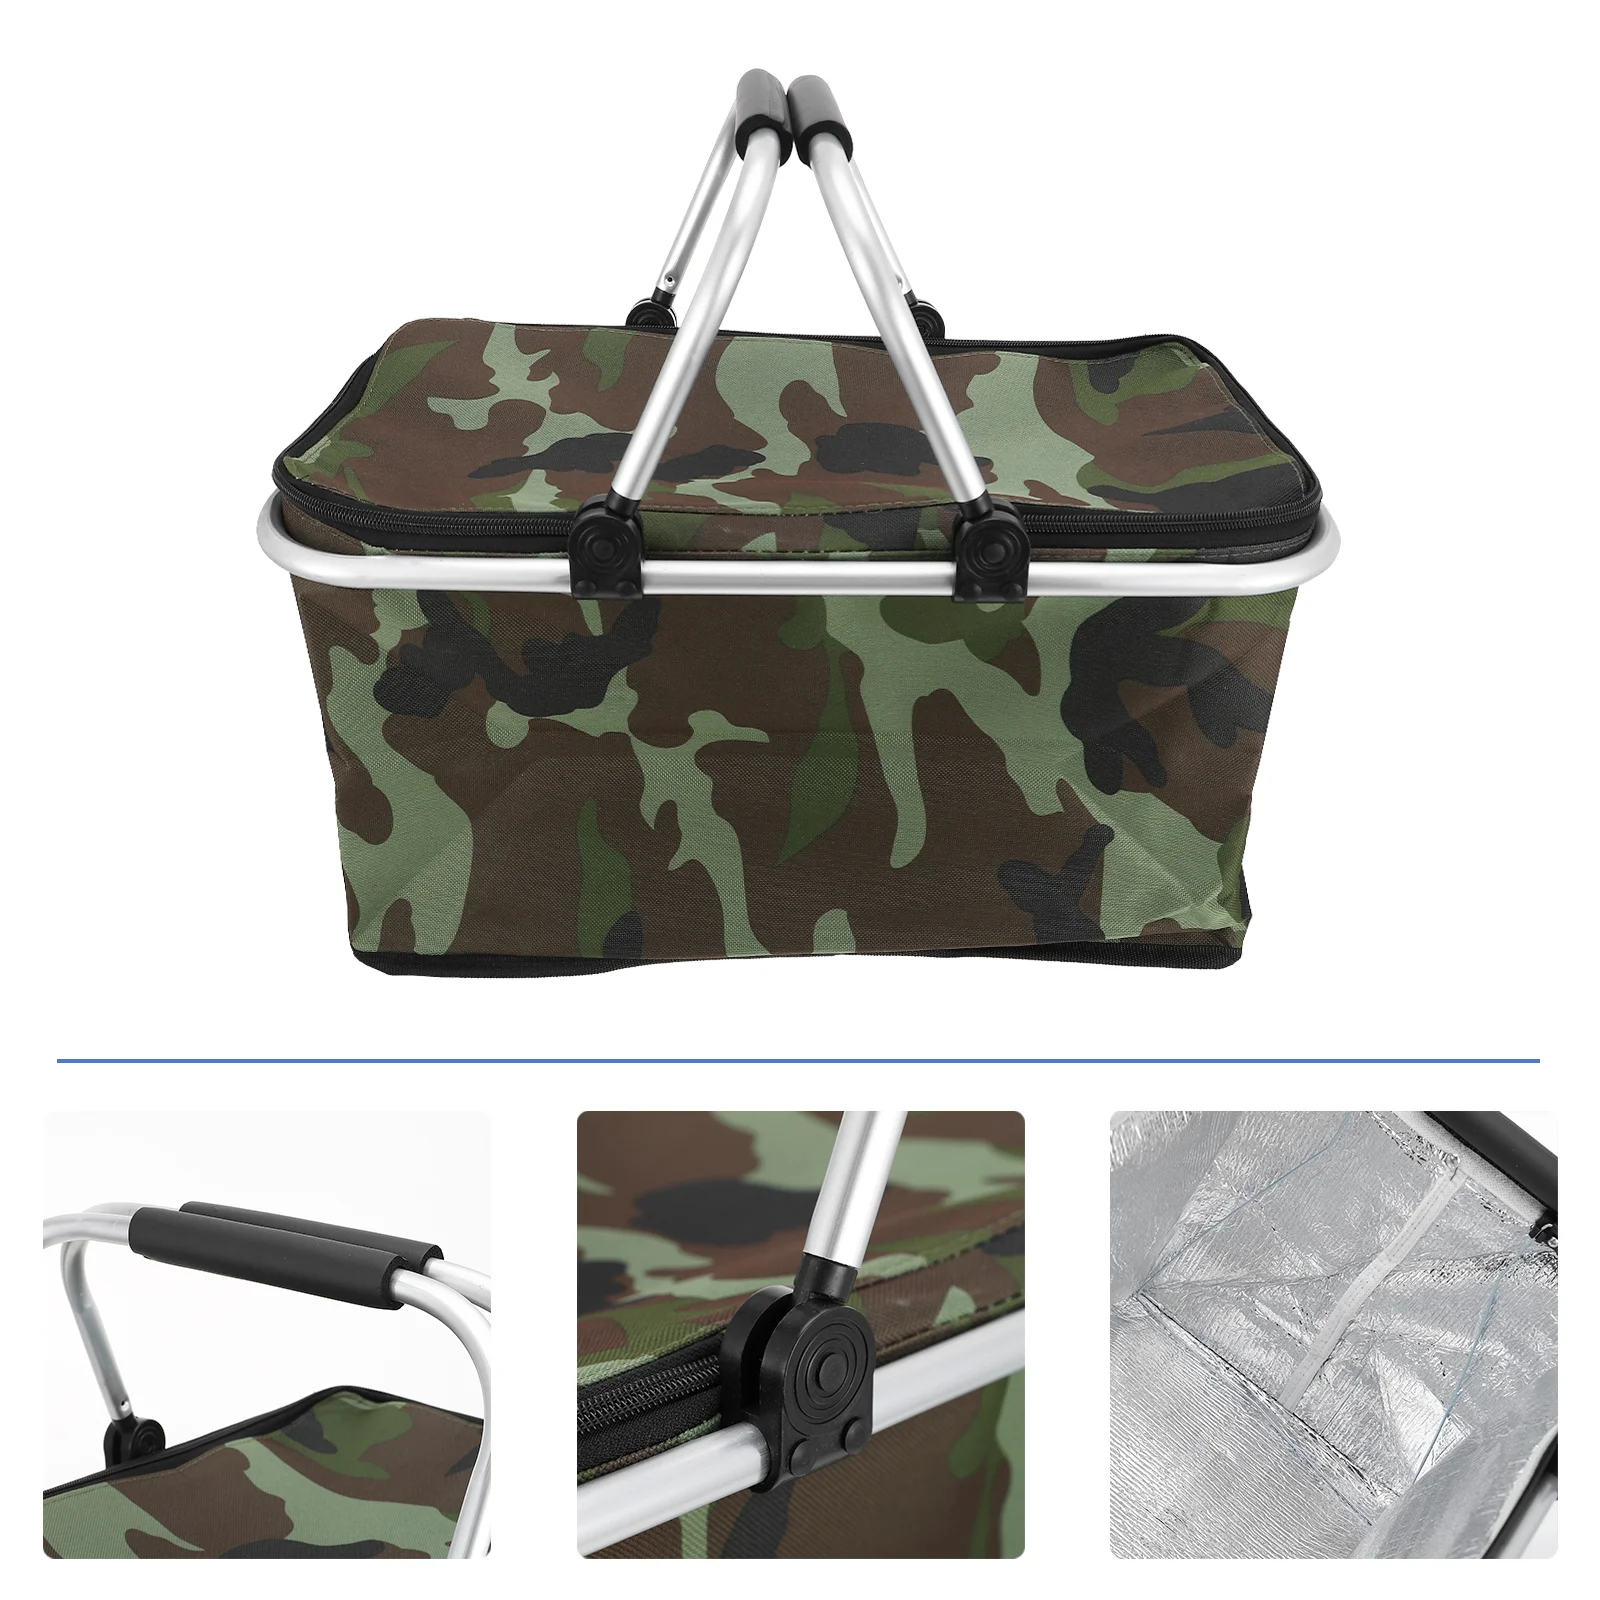 

Picnic Basket Bag Large Insulated Cooler Size Collapsible Marketaluminium Handle Leakproof Frame Aluminumlunch Tote Grocery